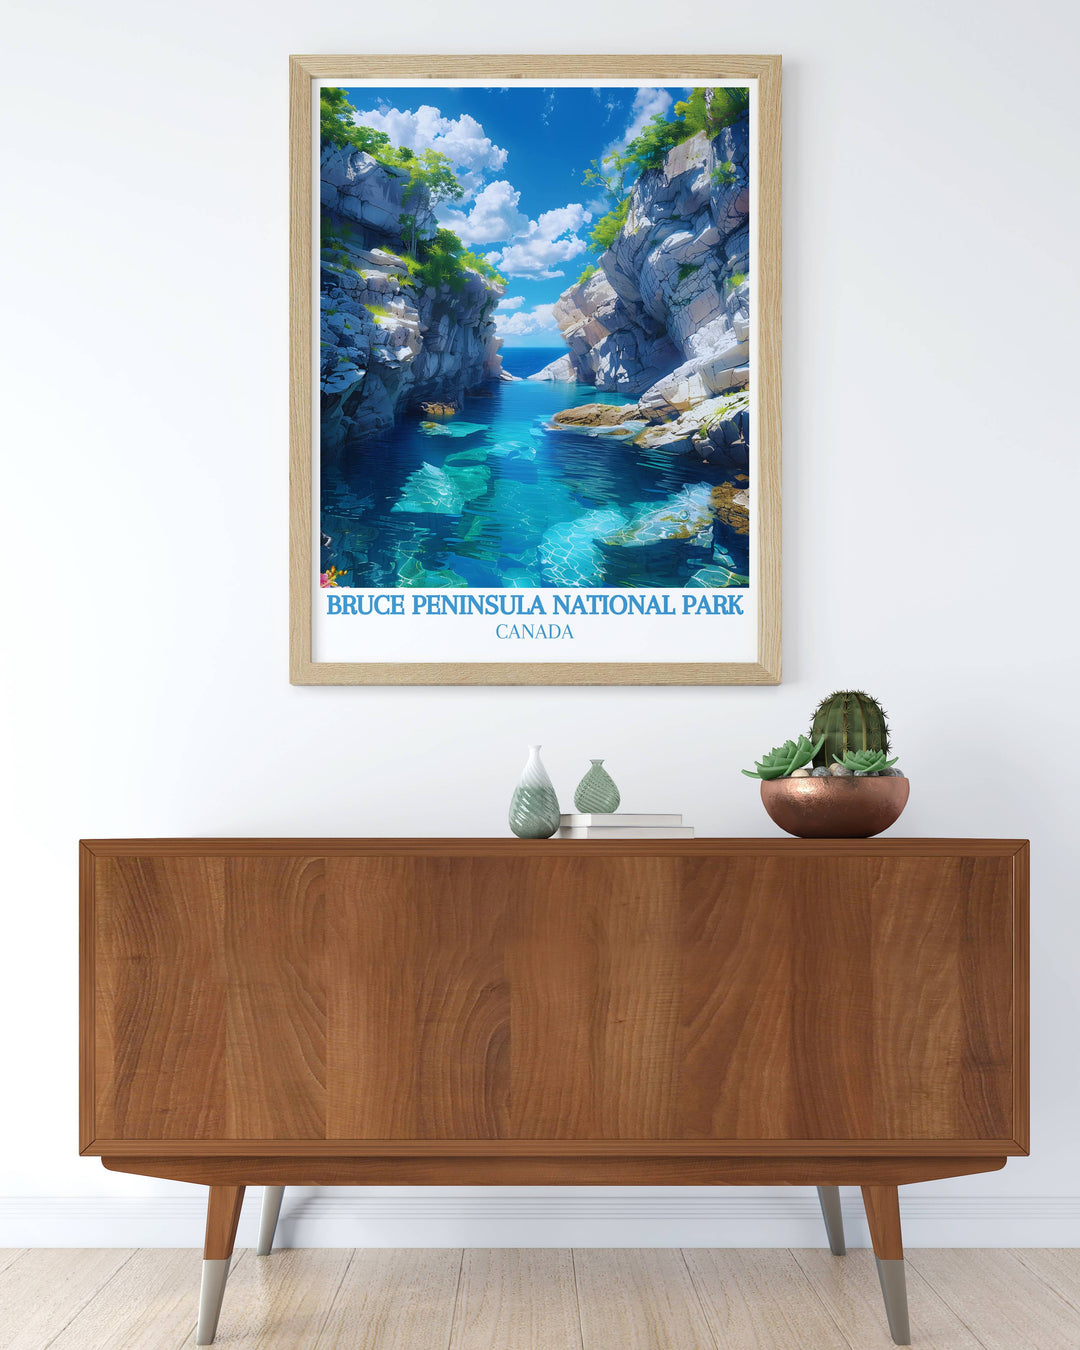 The Grotto Wall Art beautifully depicts the unique rock formations and clear waters of this Canadian treasure adding elegance and tranquility to any room in your home with its detailed craftsmanship